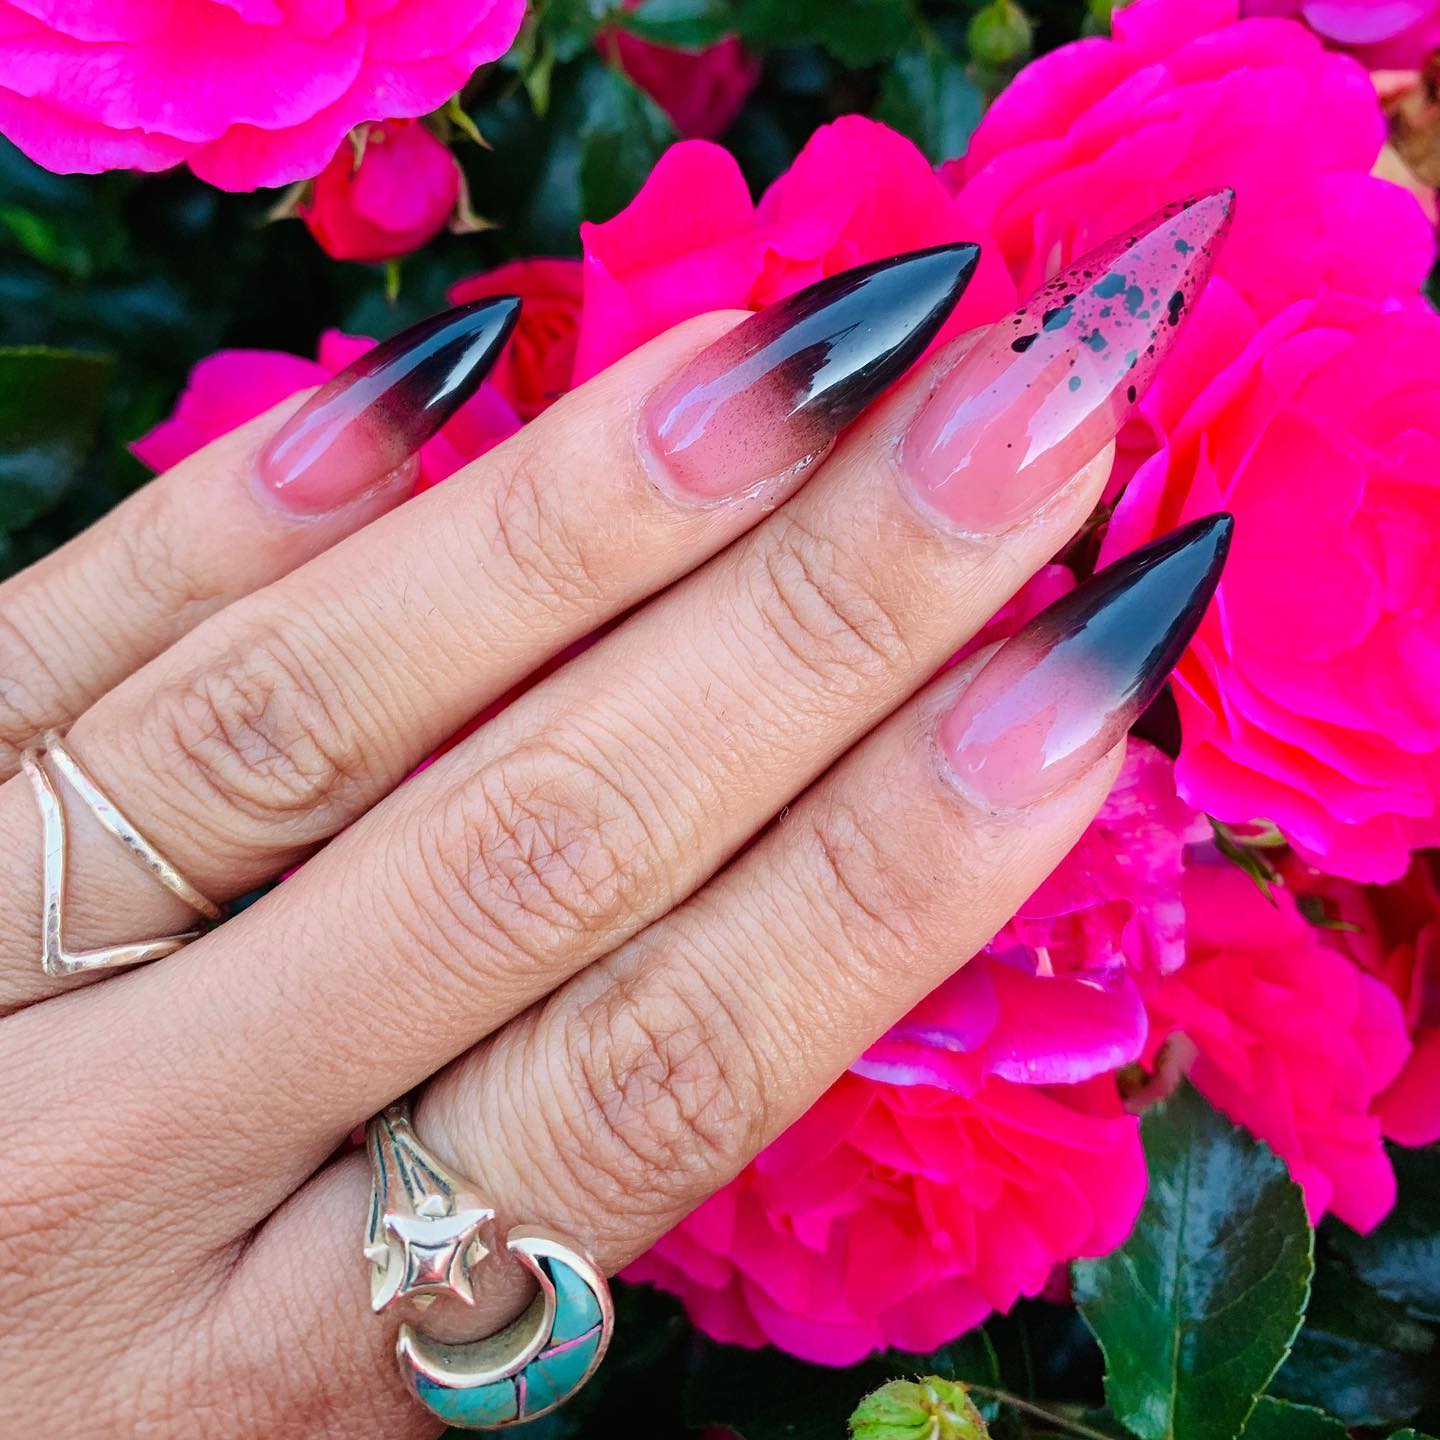 Long black ombré manicures such as this one that you’re going to like for formal wear and night outs. Women who dare to go bold and wish to try out acrylics should try this black mani.